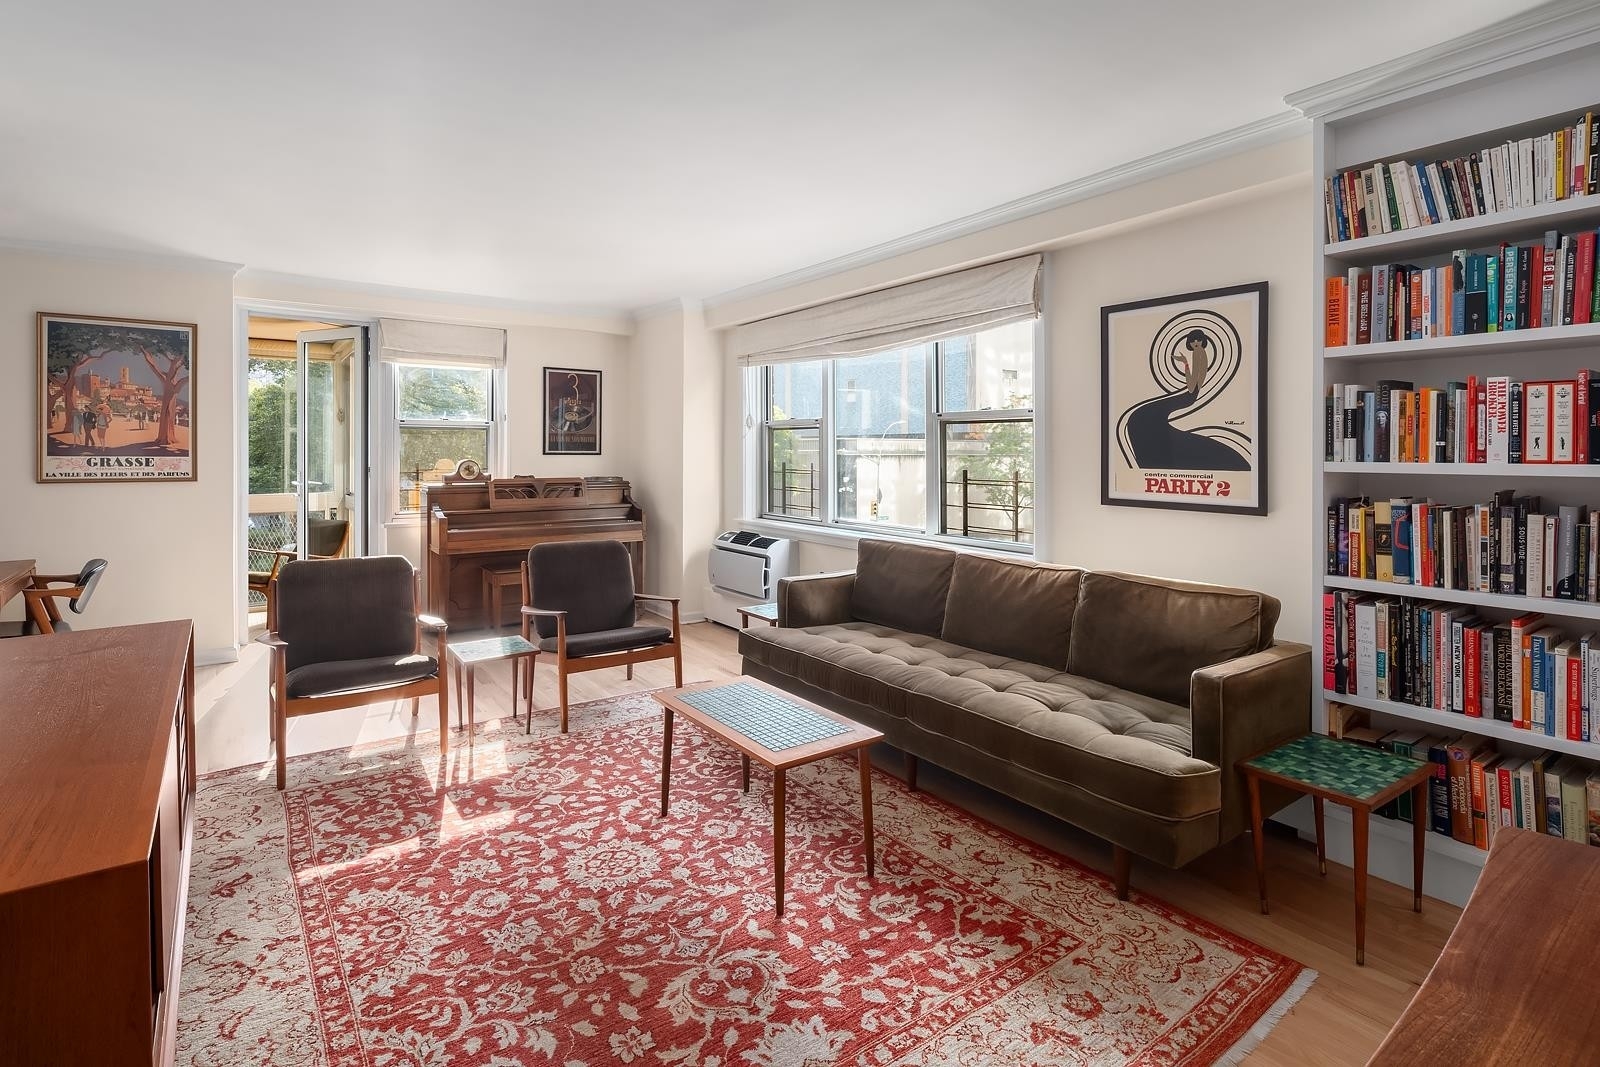 Co-op Properties for Sale at Lincoln Guild, 303 W 66TH ST, 3EE Lincoln Square, New York, NY 10069